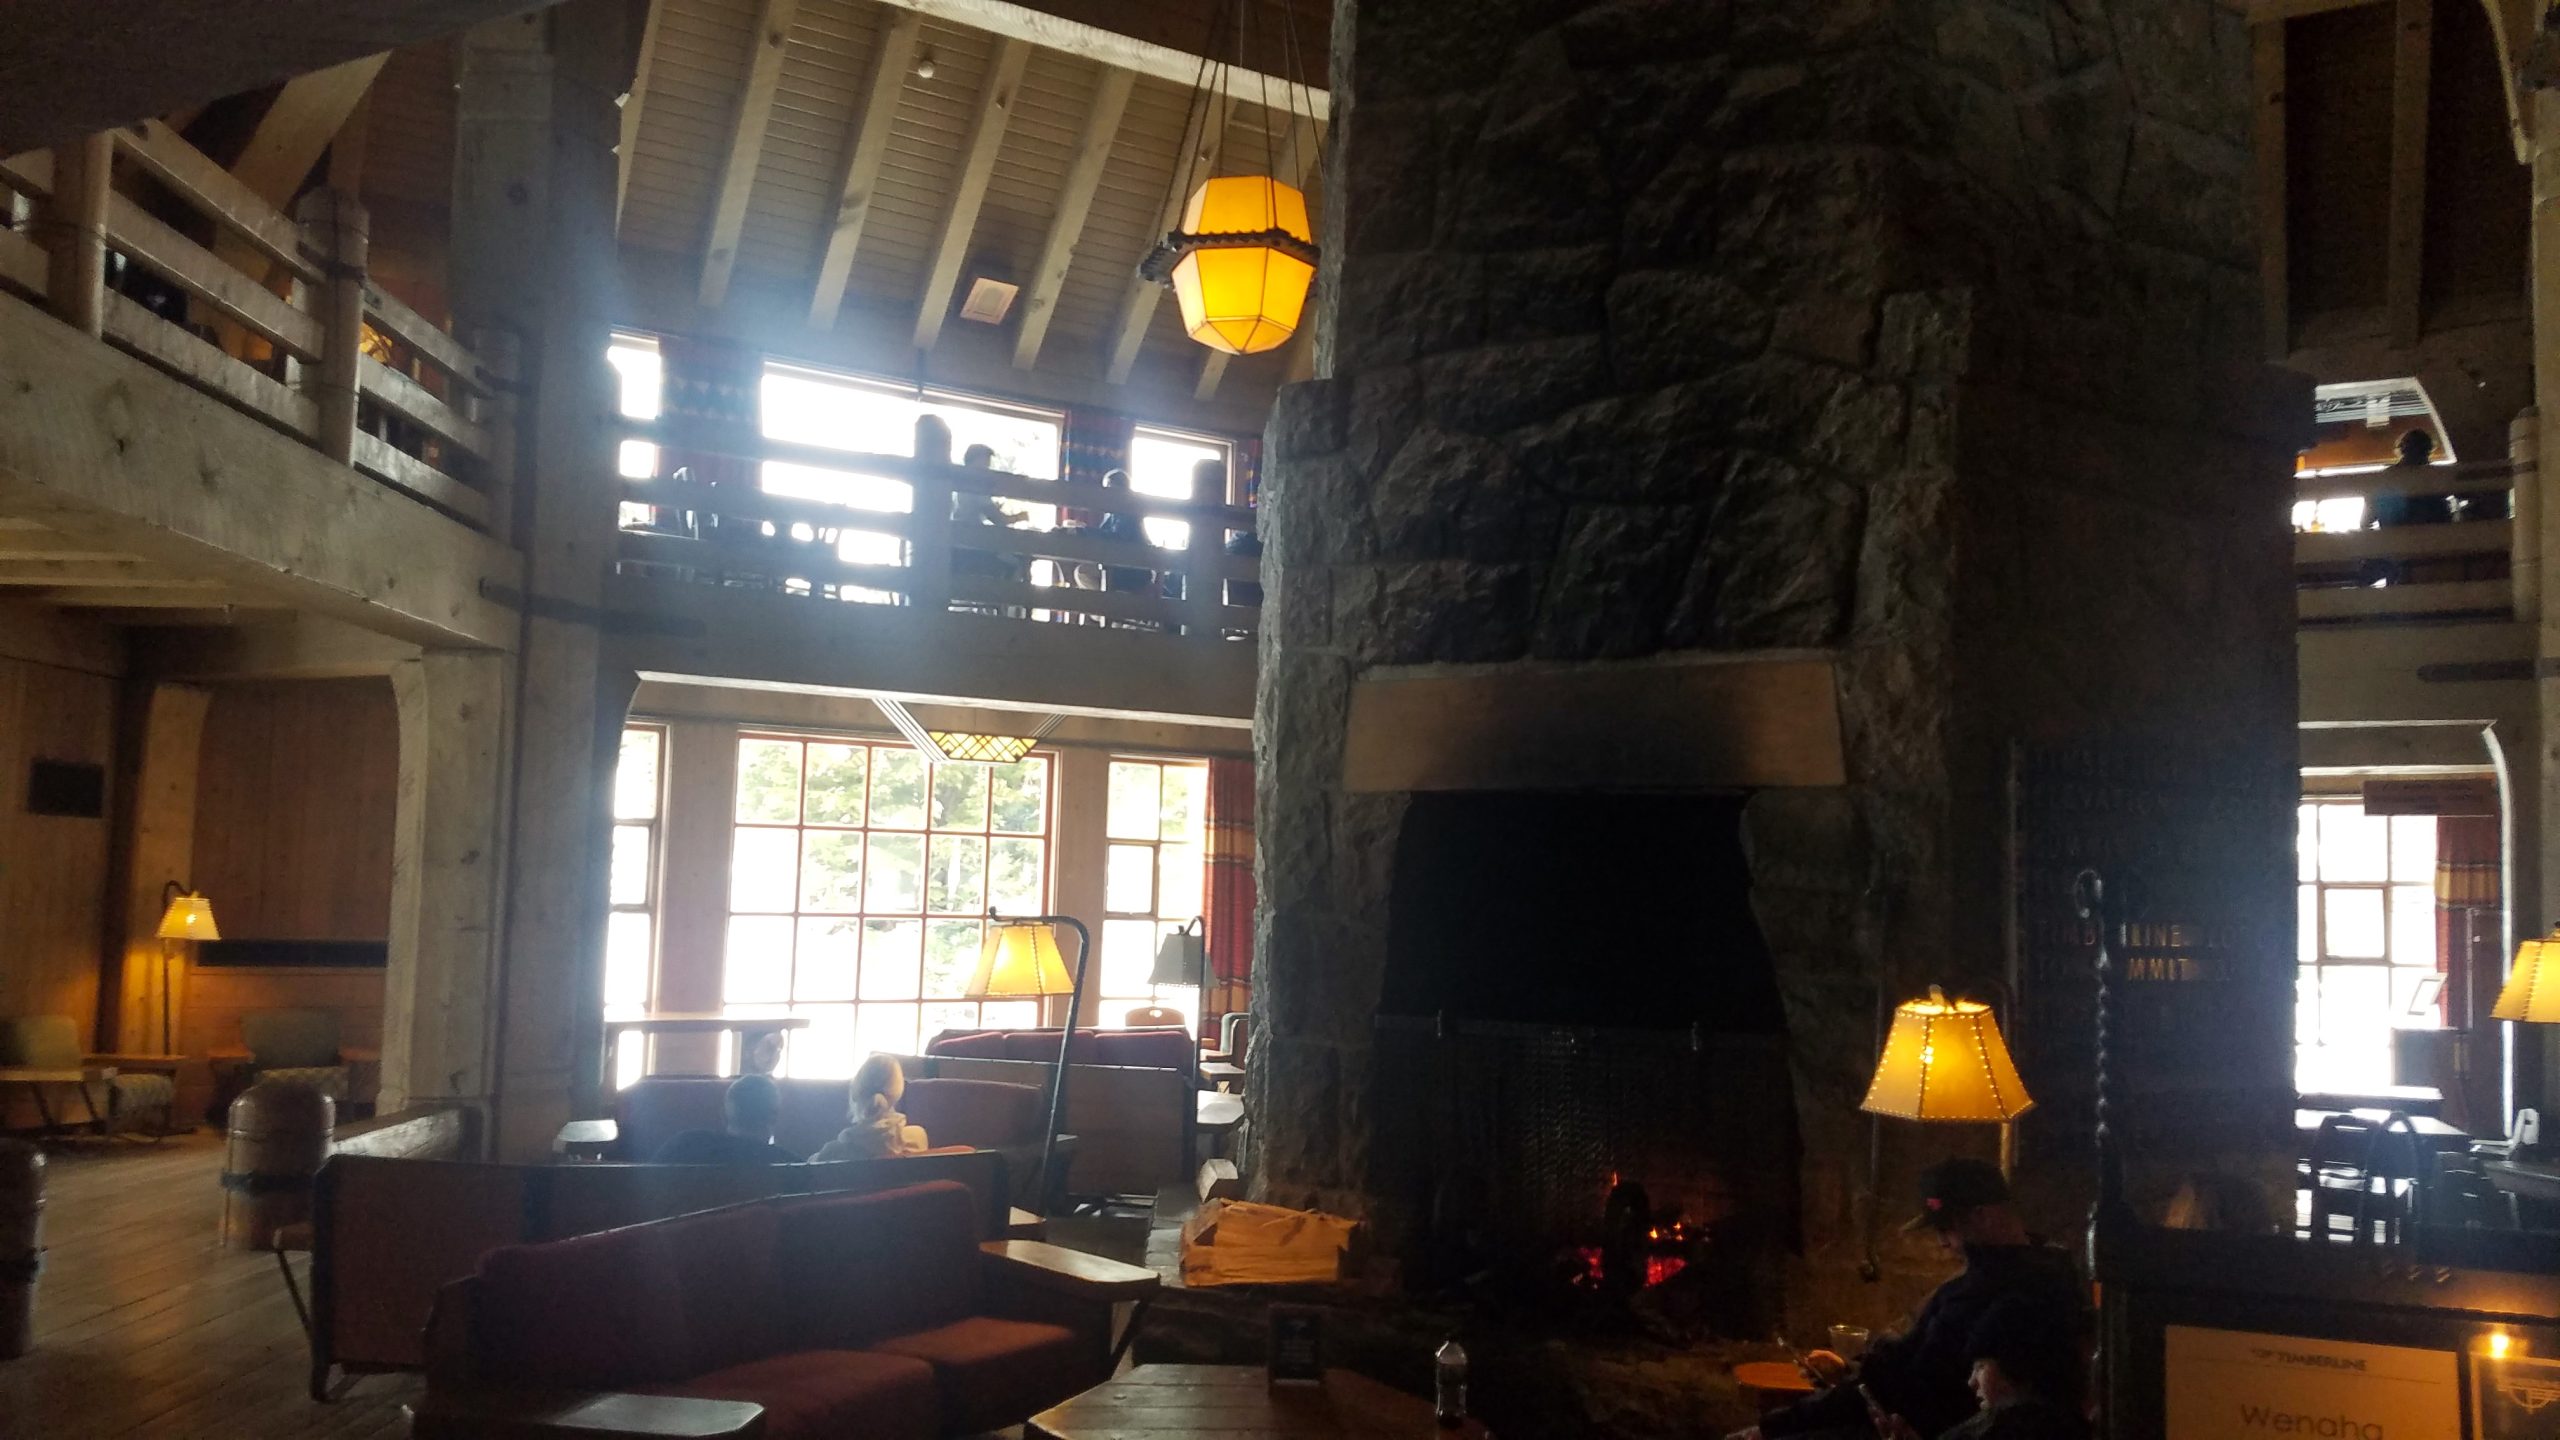 Timberline Lodge features a finely crafted lobby area with a large stone fireplace.